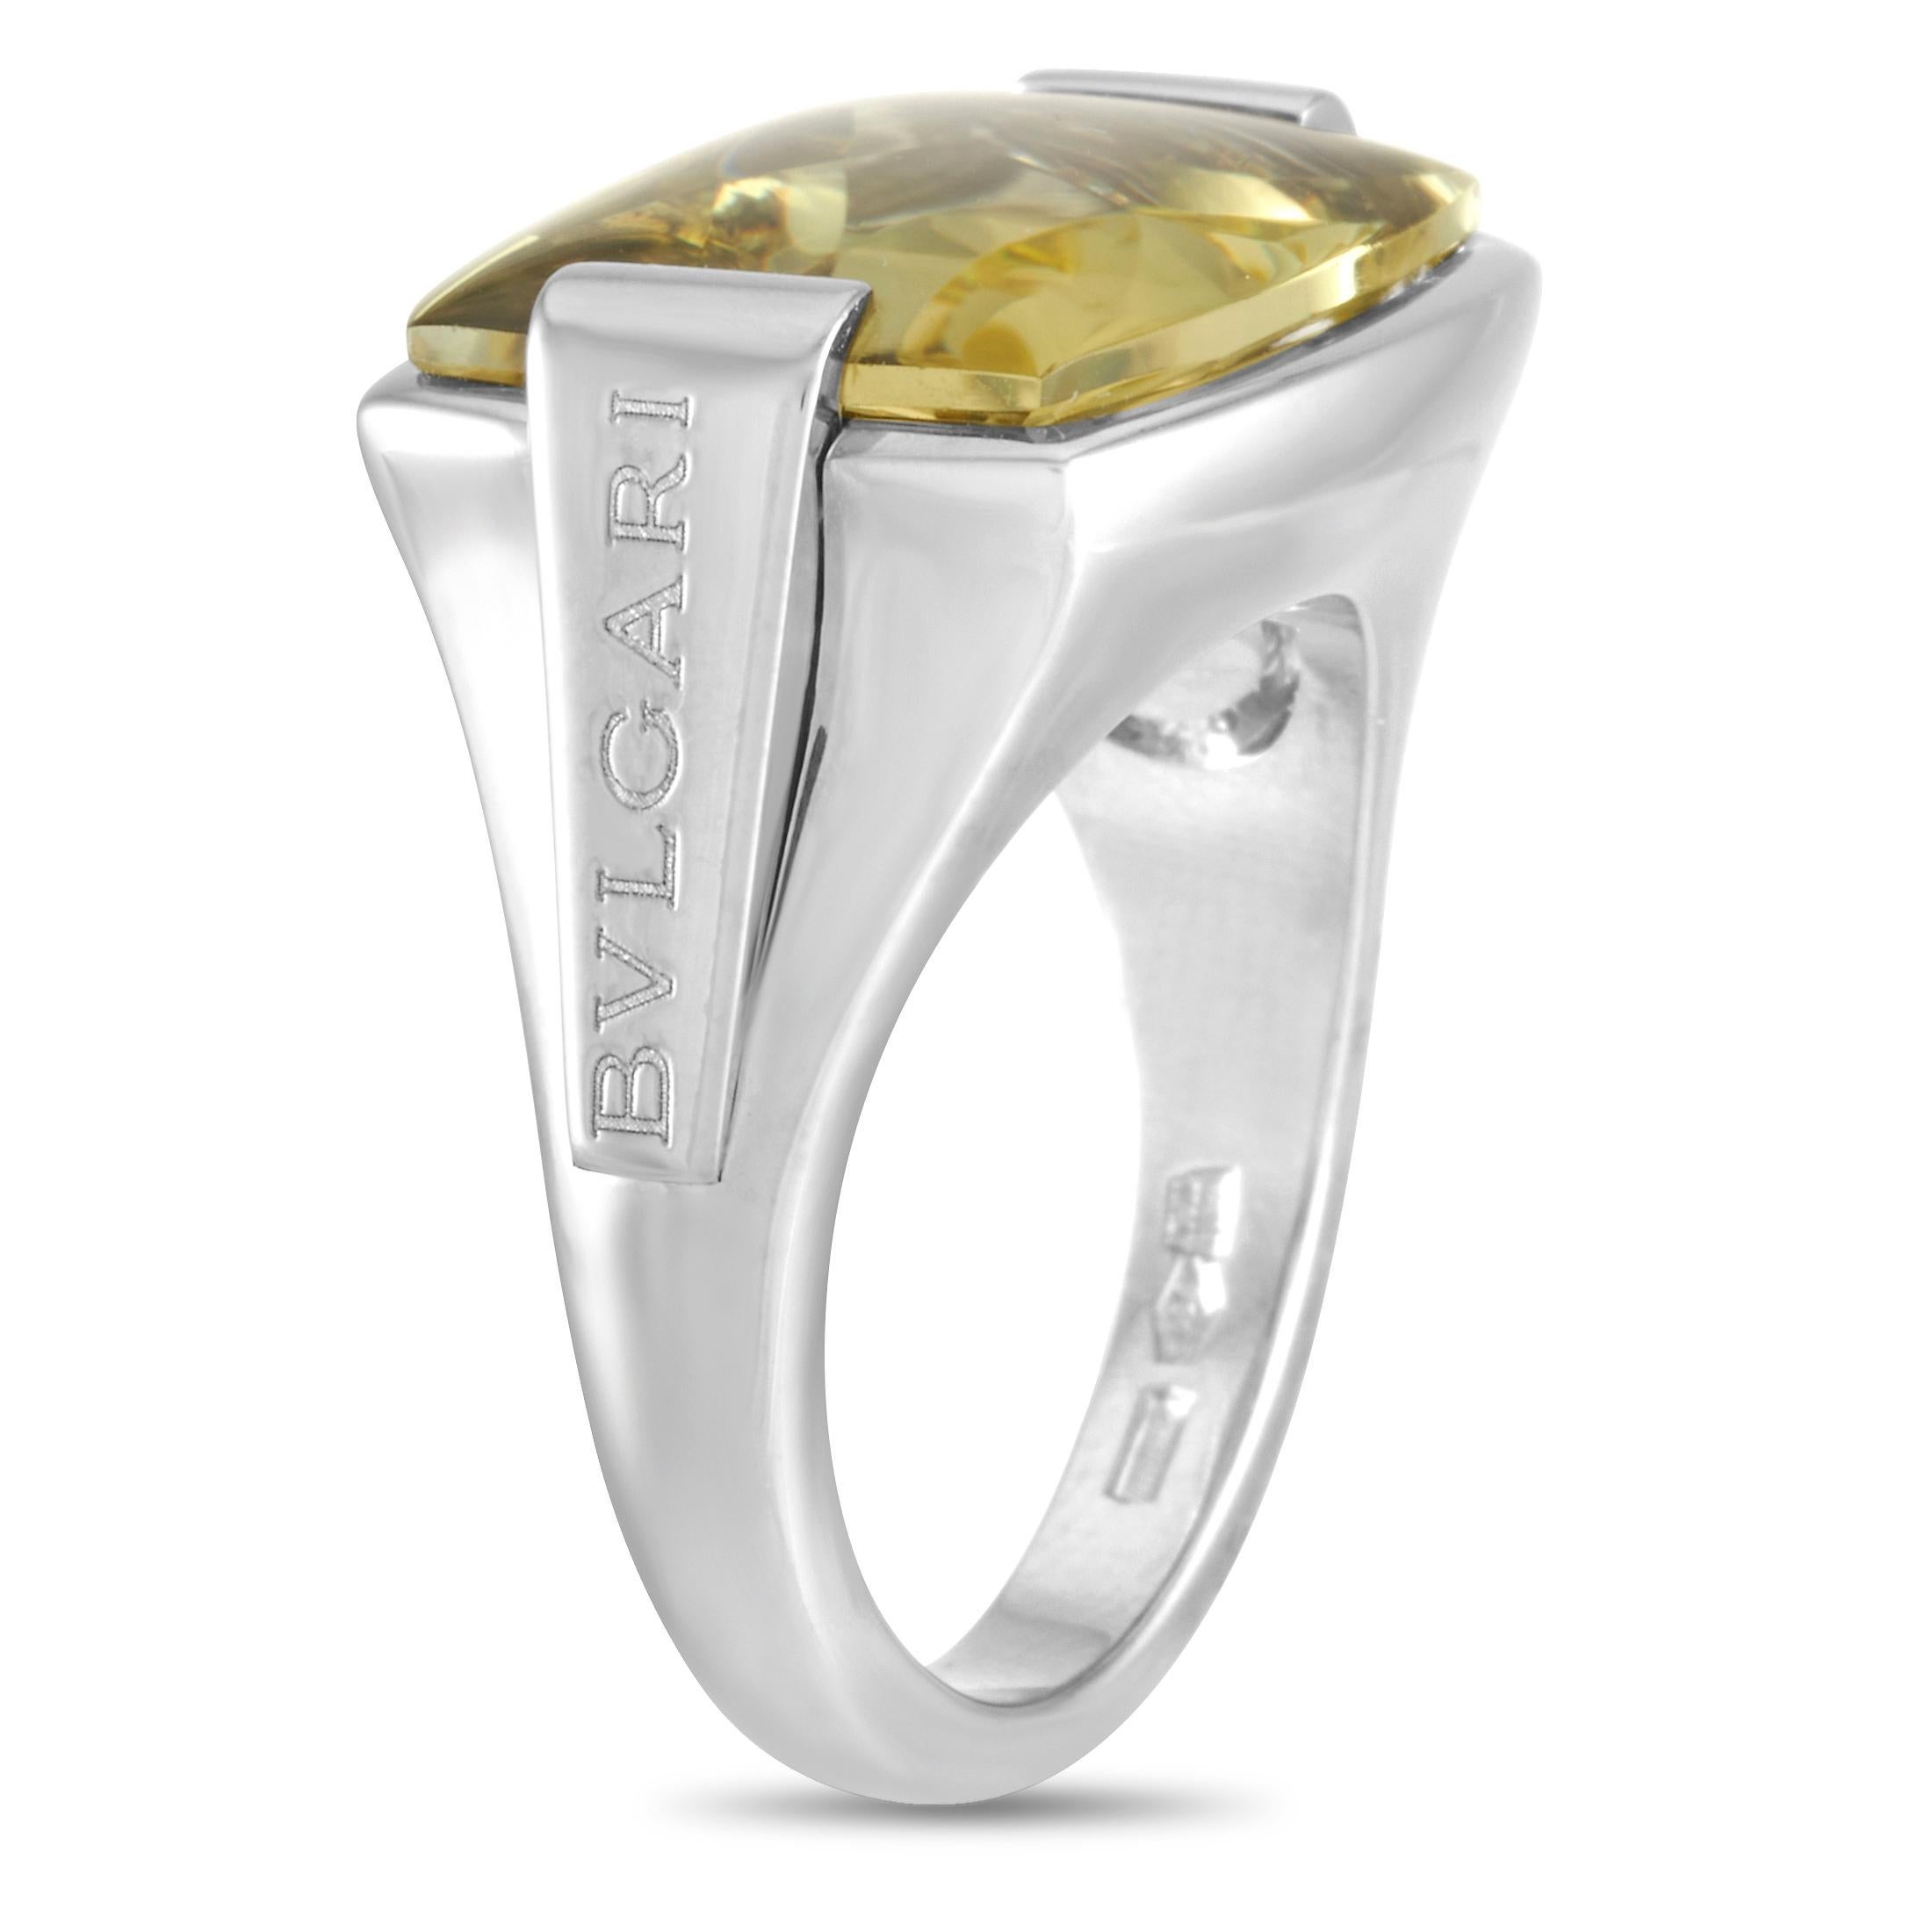 This Bvlgari ring is crafted from 18K white gold and set with a lemon citrine. The ring weighs 12.1 grams. It boasts band thickness of 3 mm and top height of 7 mm, while top dimensions measure 13 by 18 mm.